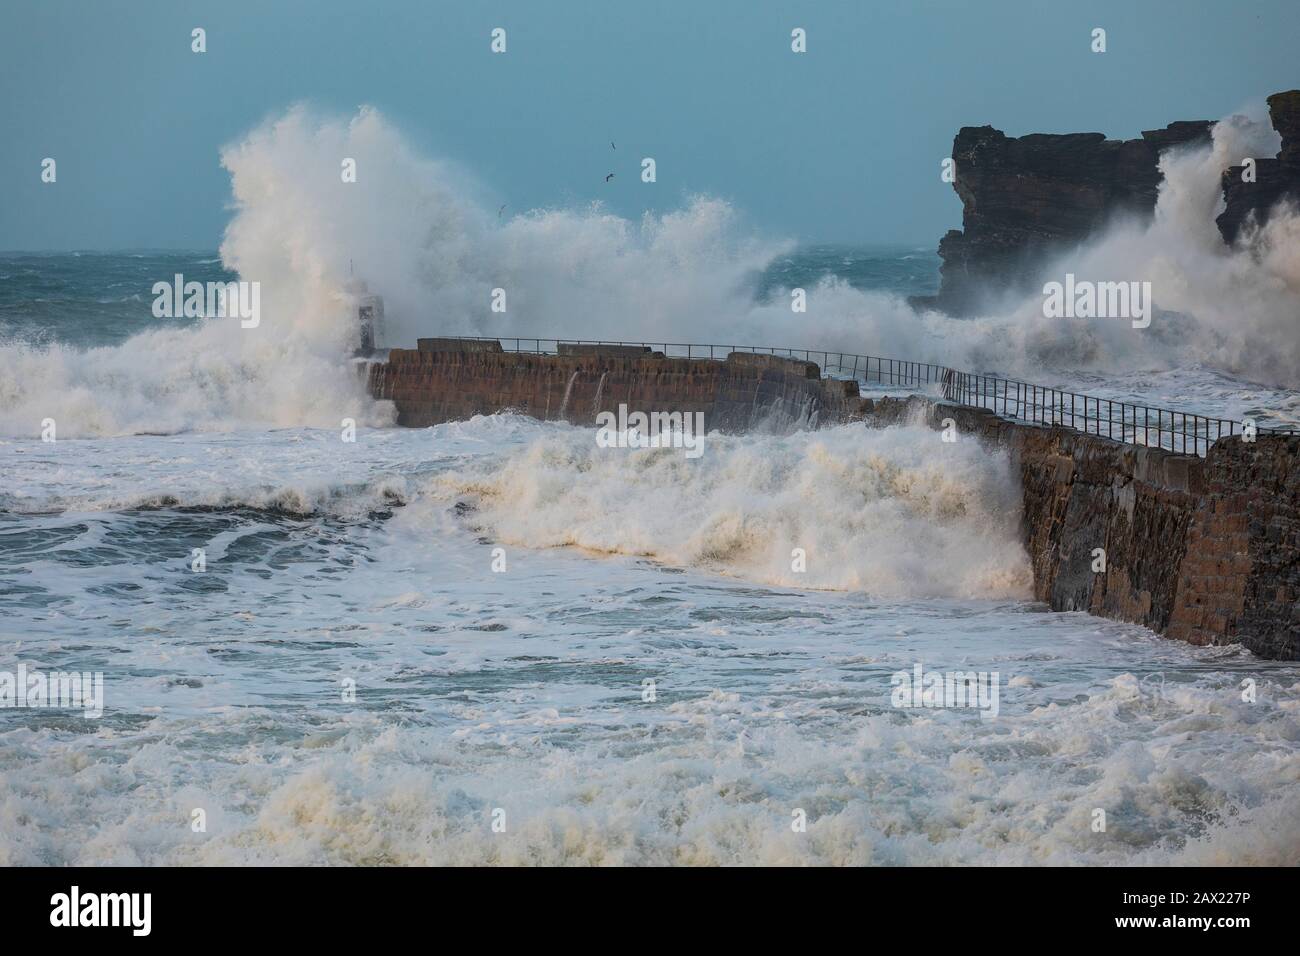 Storm Ciara batters the Cornish coast with giant waves as tall as the surrounding cliffs crashing against the breakwater Stock Photo